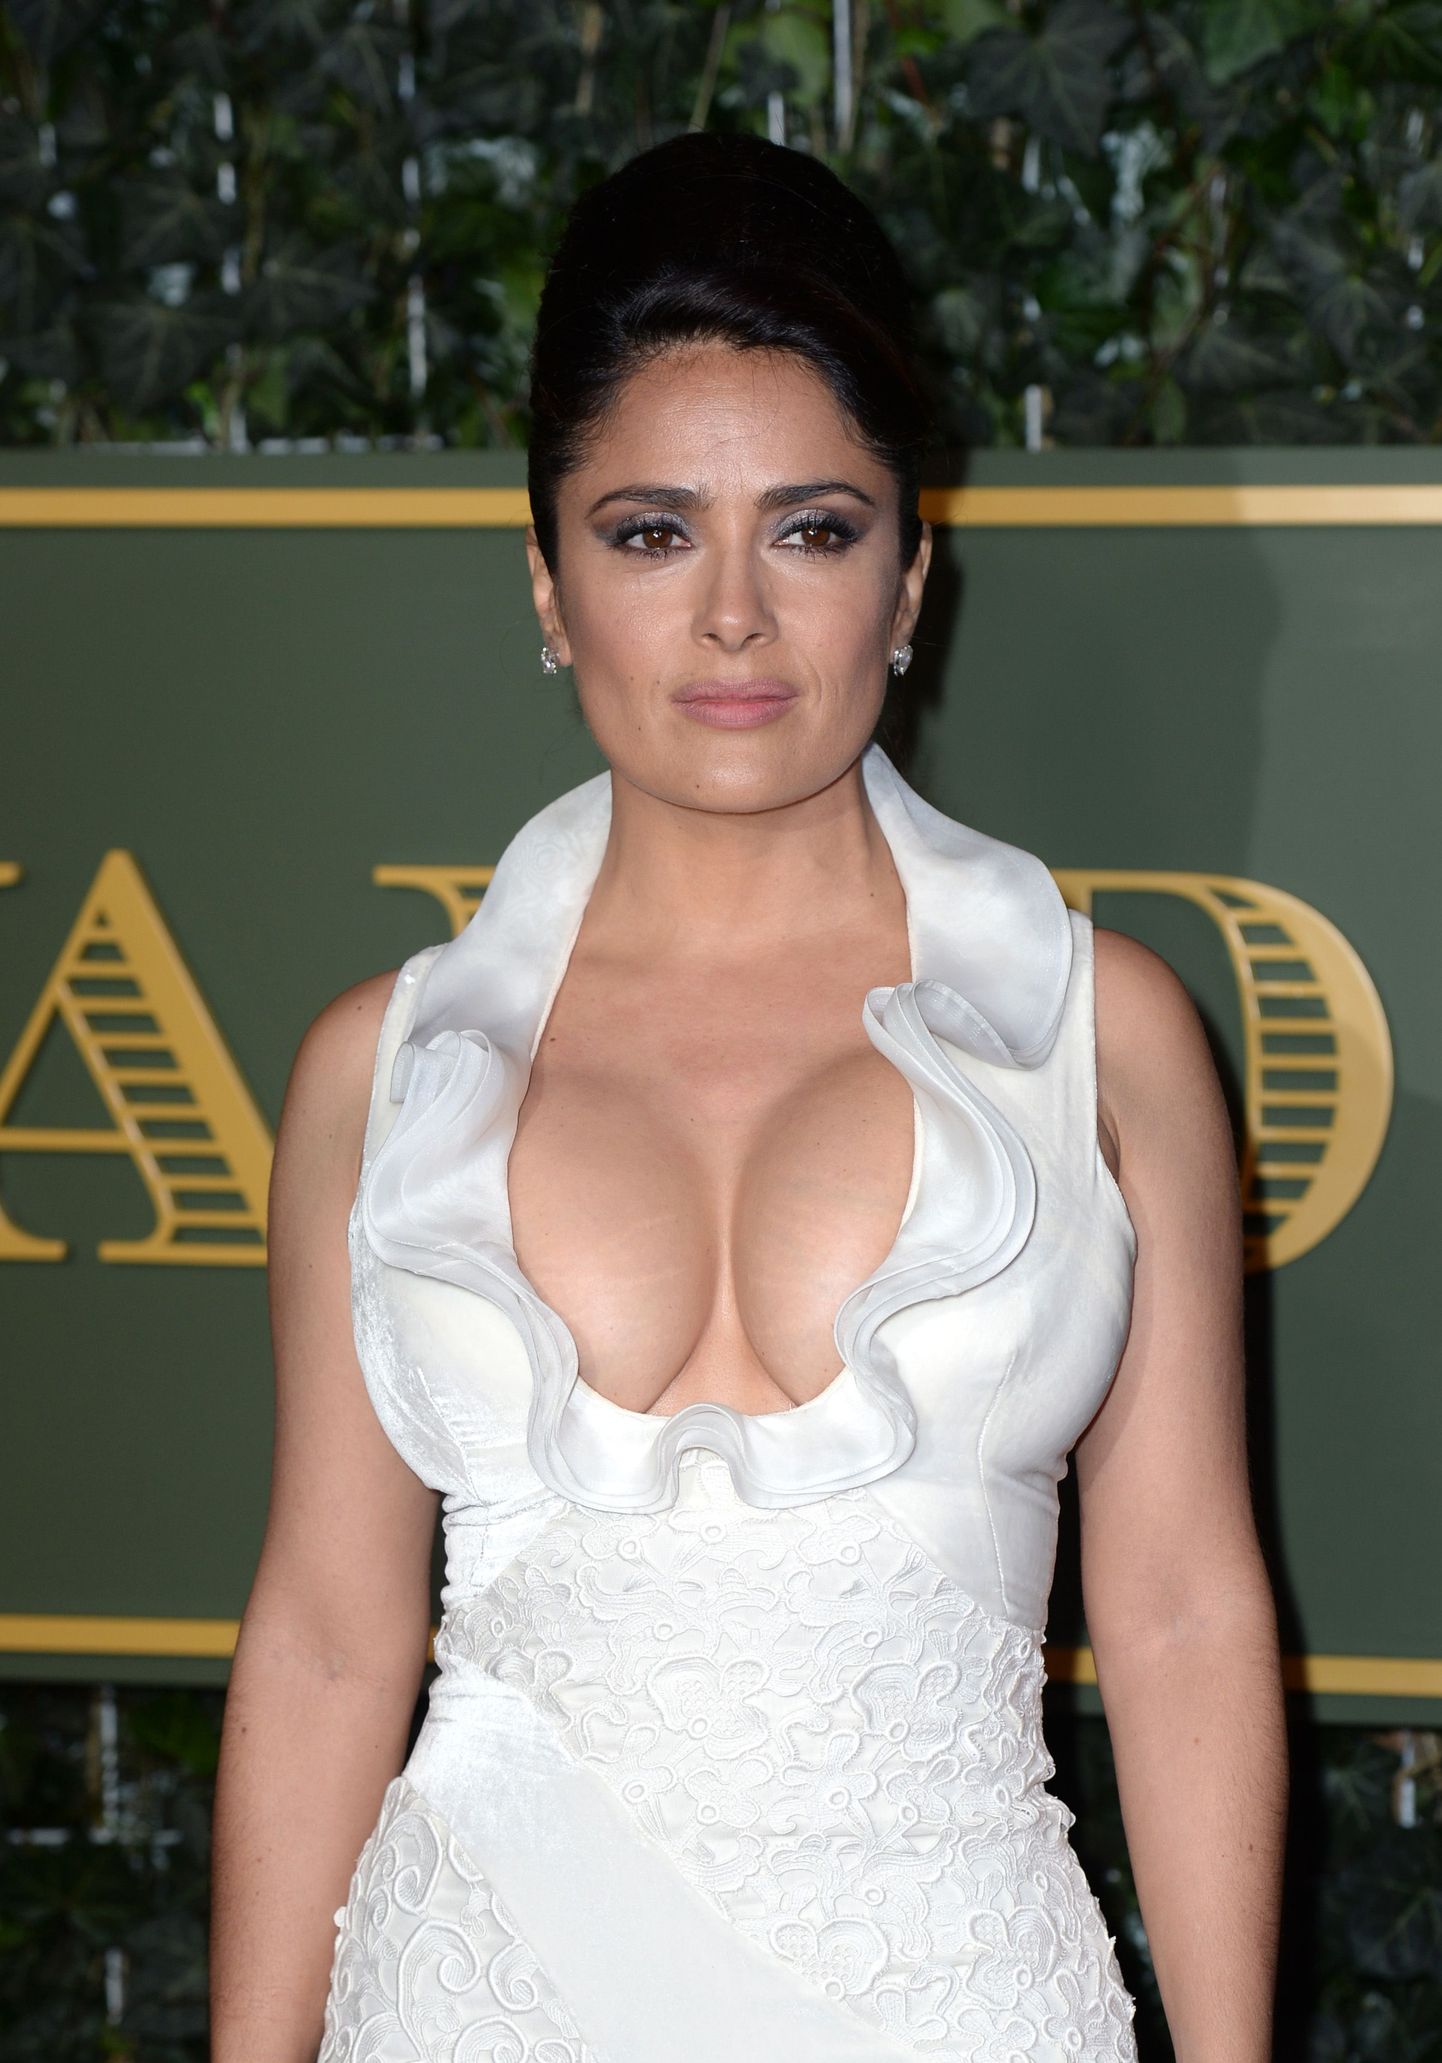 Salma Hayek attending the London Evening Standard Theatre Awards held at the Old Vic Theatre, London on 22nd November, 2015.
Photo credit should read: Doug Peters EMPICS Entertainment